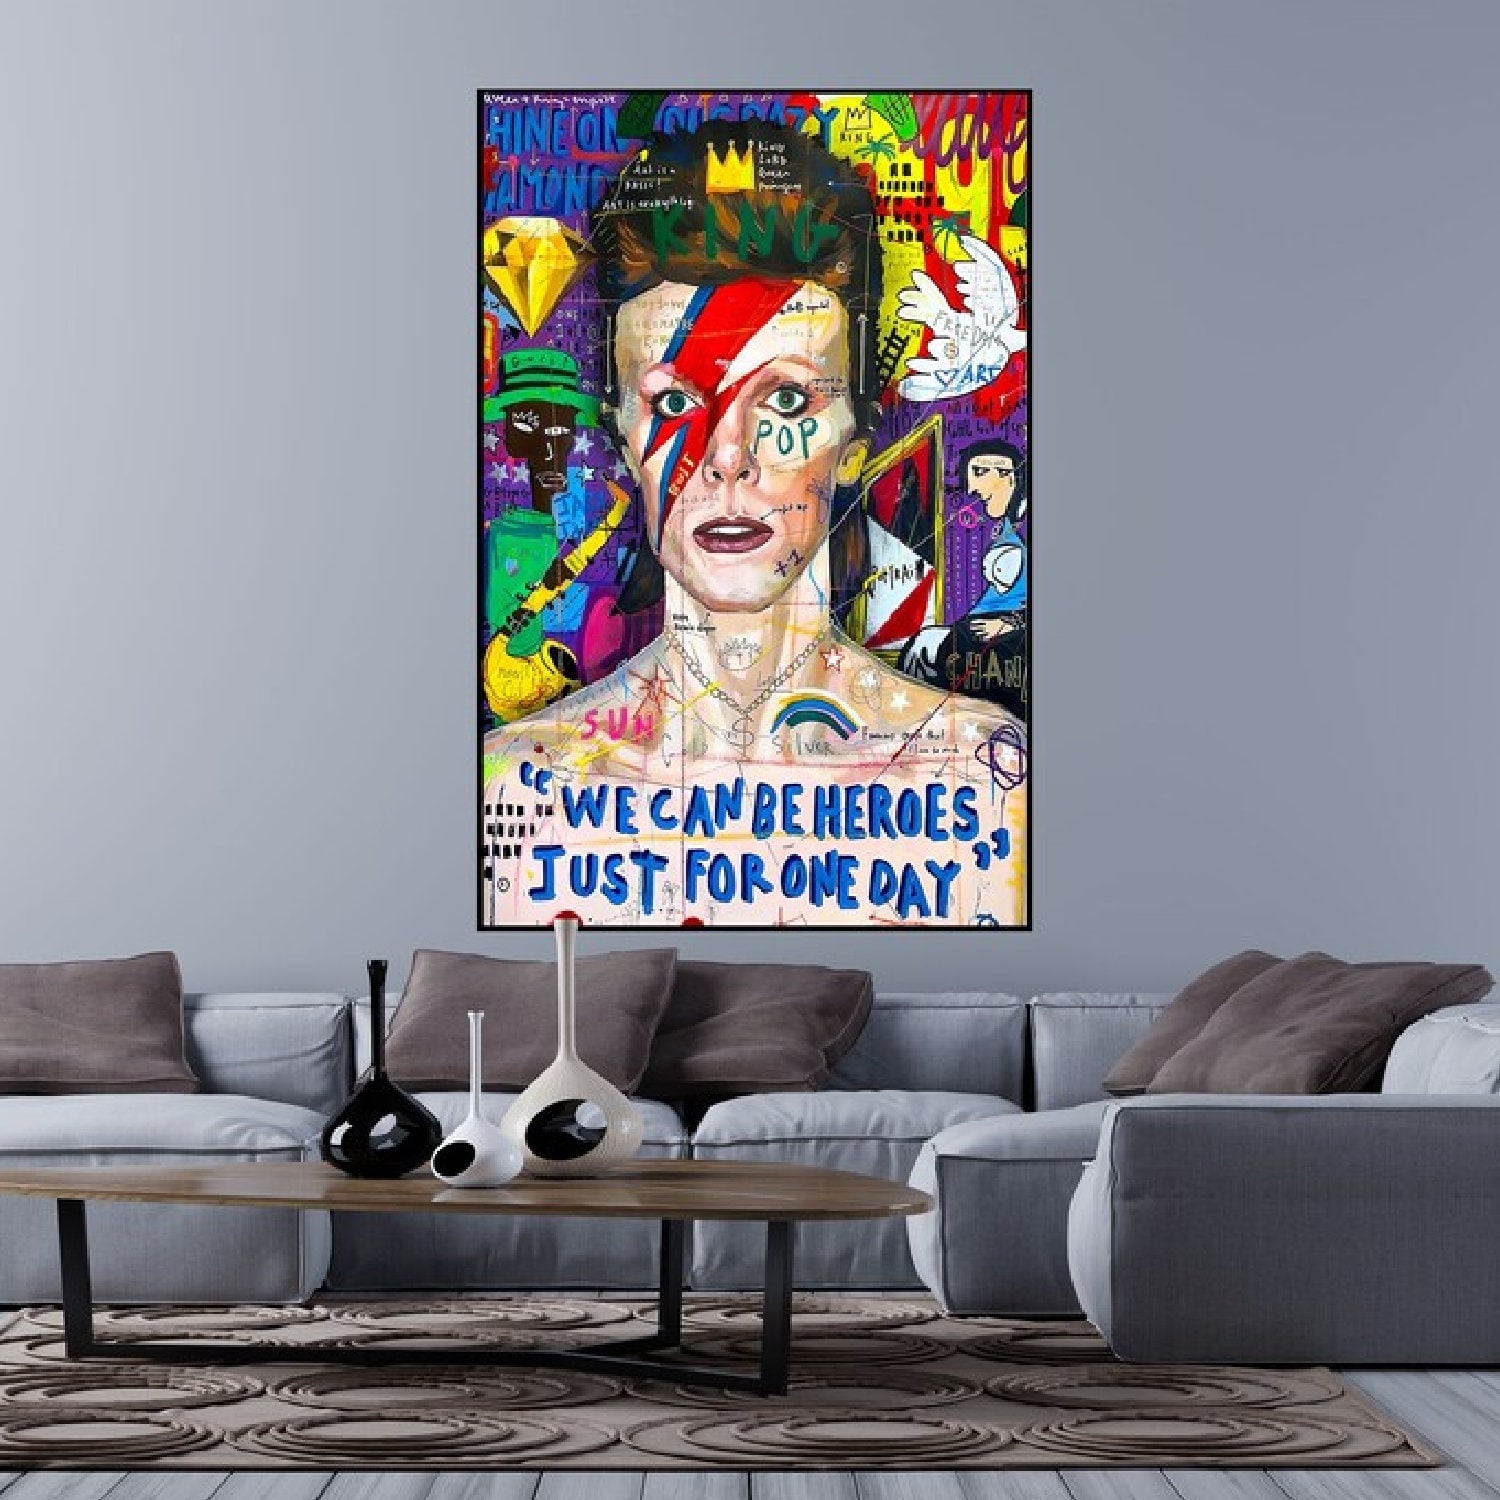 Acrylic King We Can Be Heroes Pop Art Oil Painting